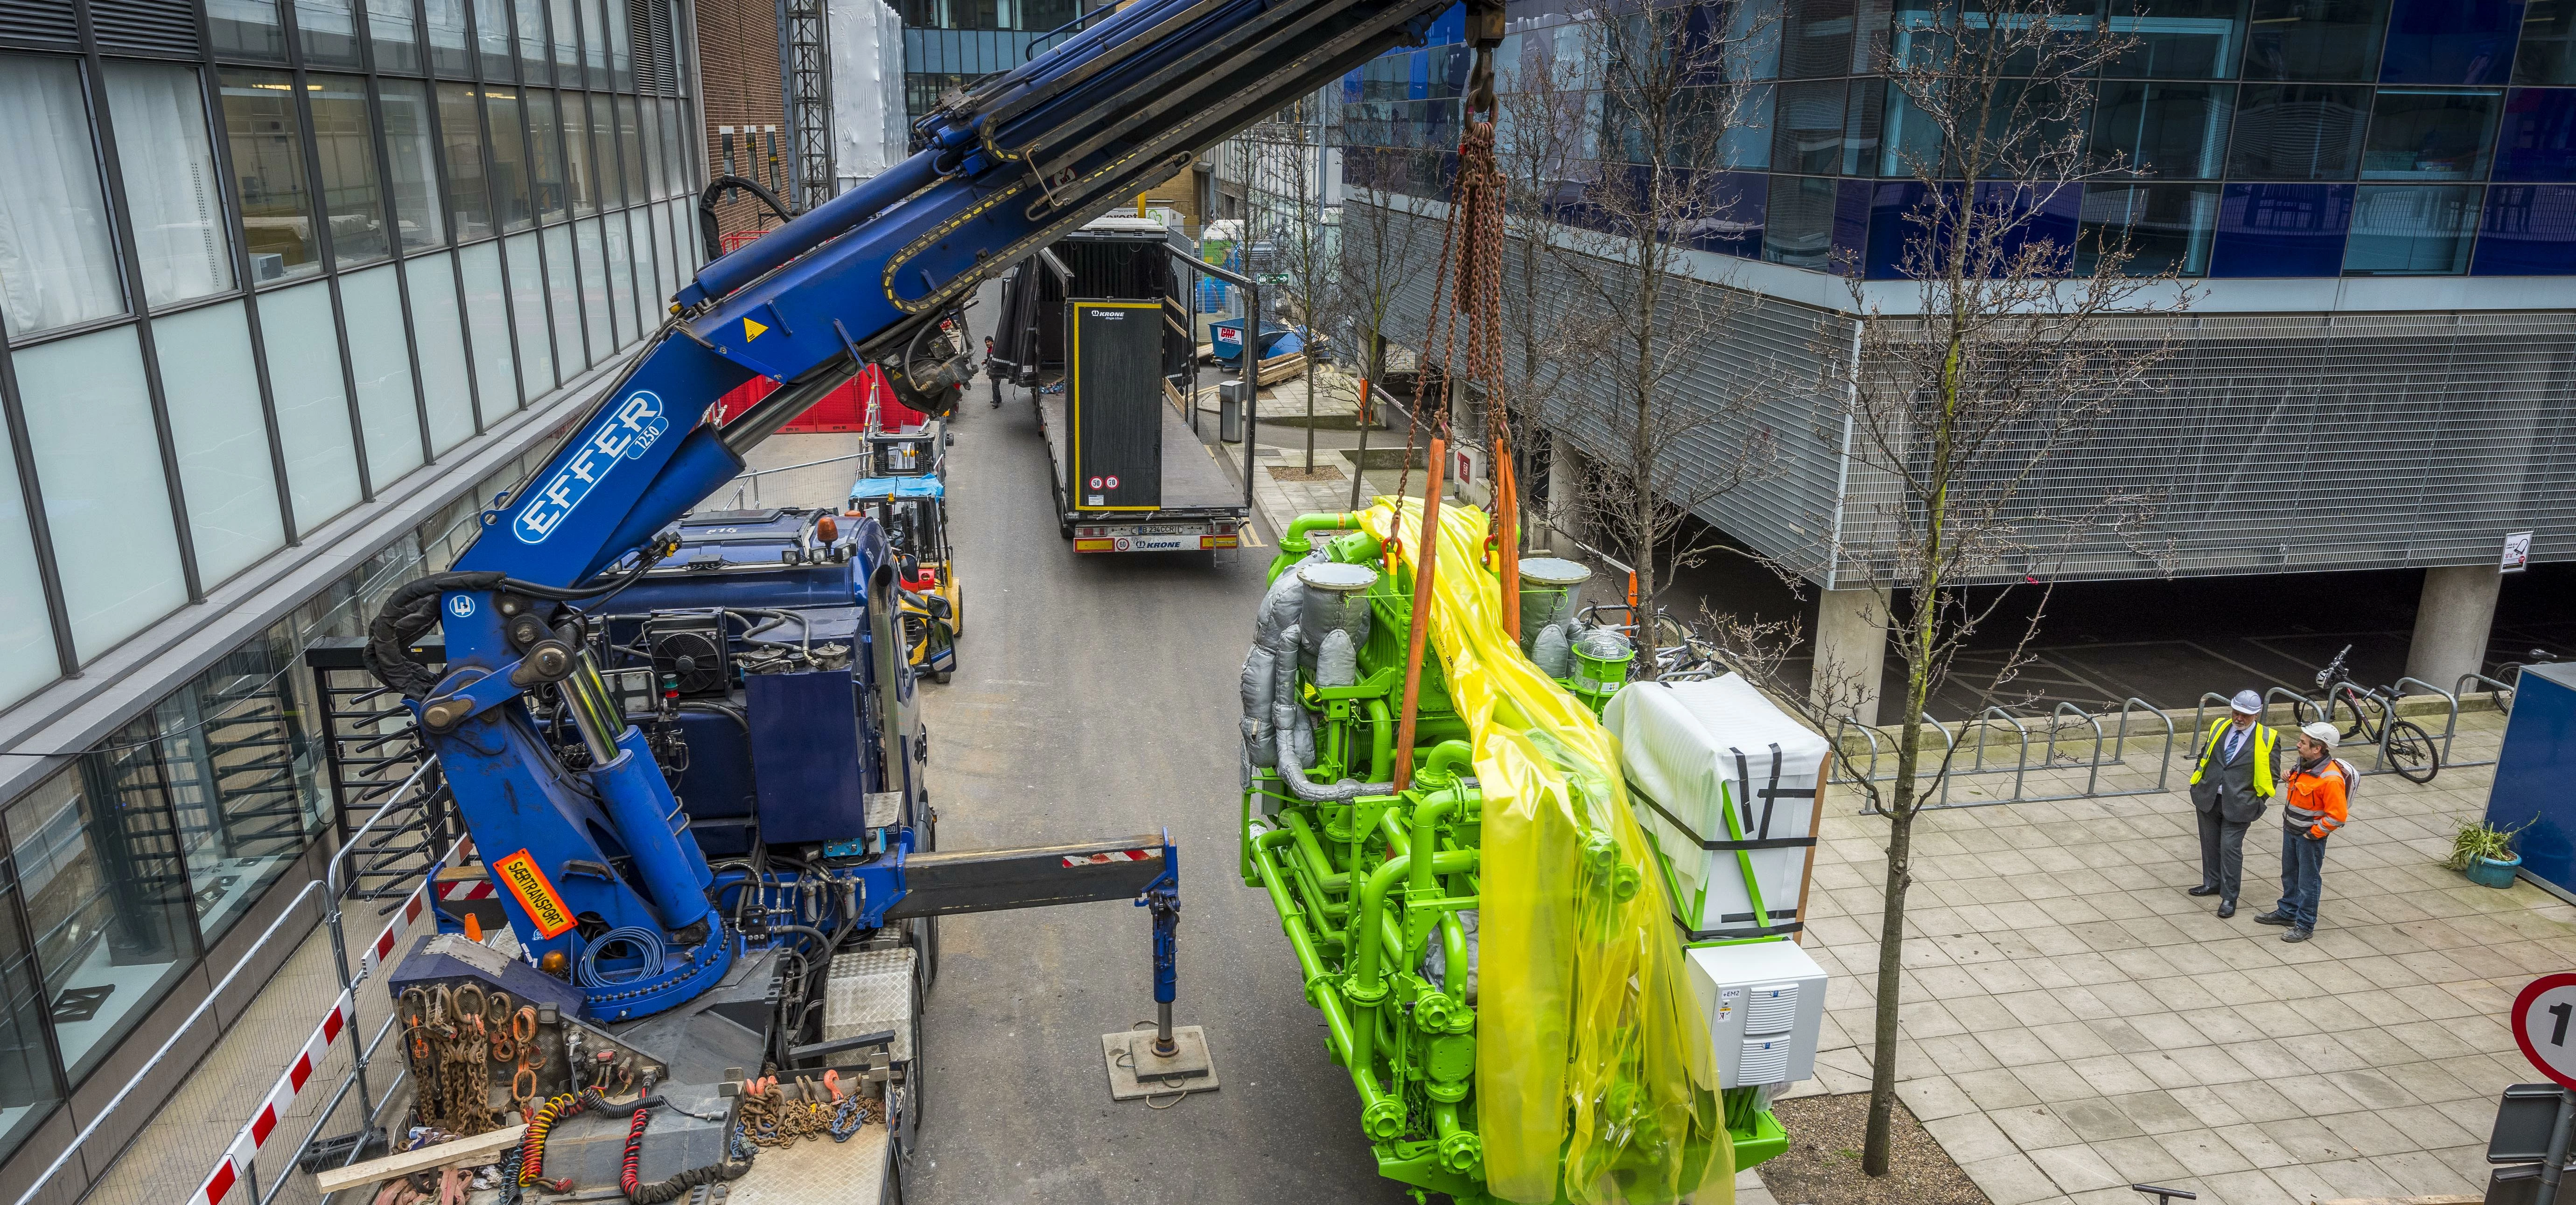 One of the two 44 tonnes Combined Heat and Power Engines being unloaded at Imperial College London